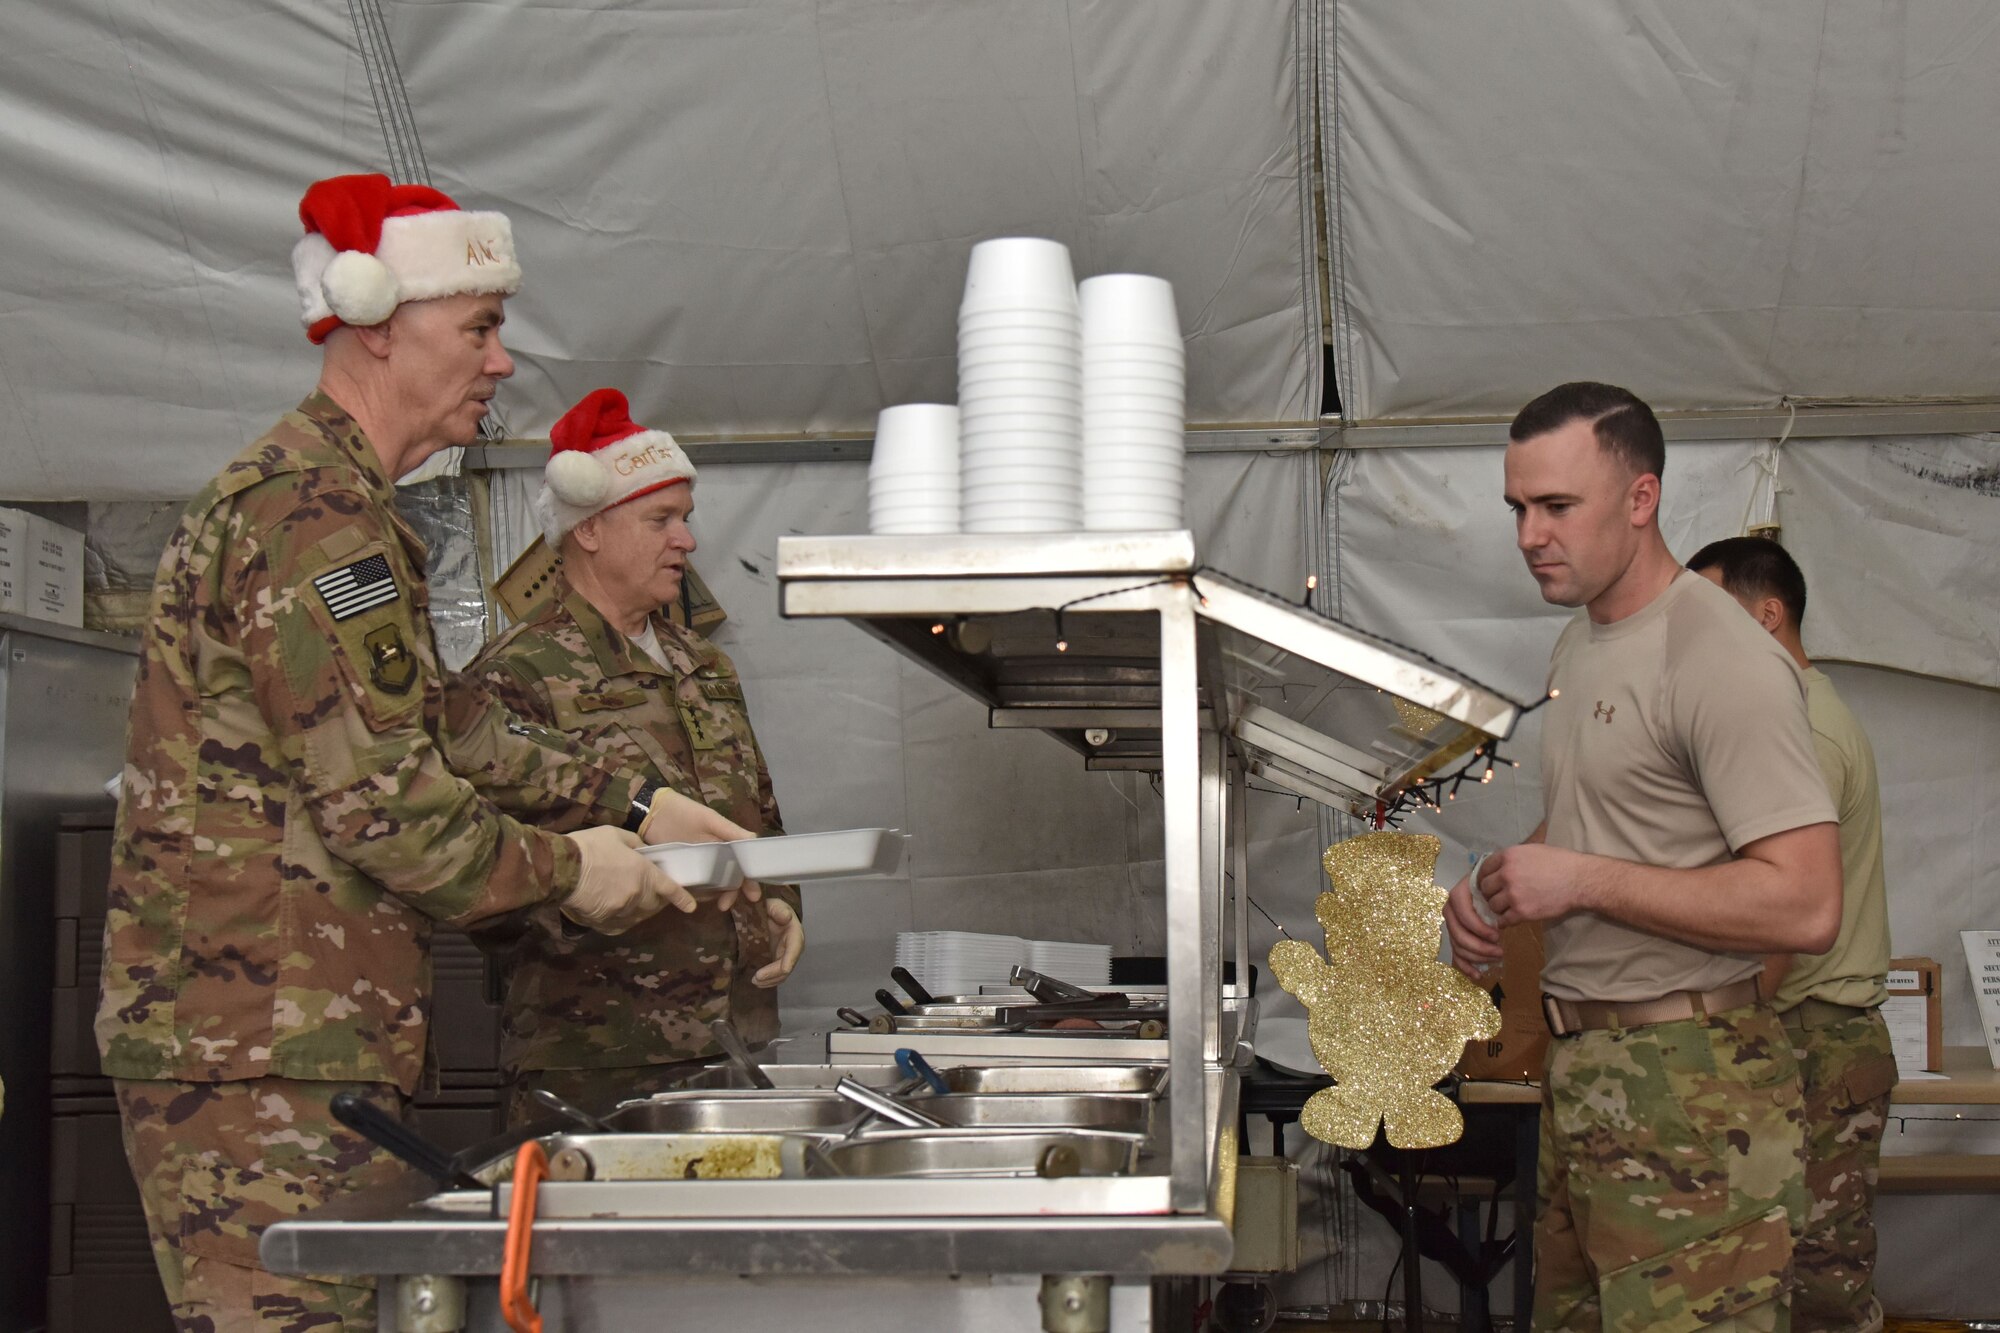 U.S. Air Force Lt. Gen. Scott Rice, Air National Guard director, and Chief Master Sgt. Ronald Anderson Jr., ANG command chief, serve Christmas lunch at the 407th Air Expeditionary Group in Southwest Asia, Dec. 25, 2017. They visited the 407th AEG to spend Christmas with Airmen. (U.S. Air Force photo by Staff Sgt. Joshua Edwards/Released)